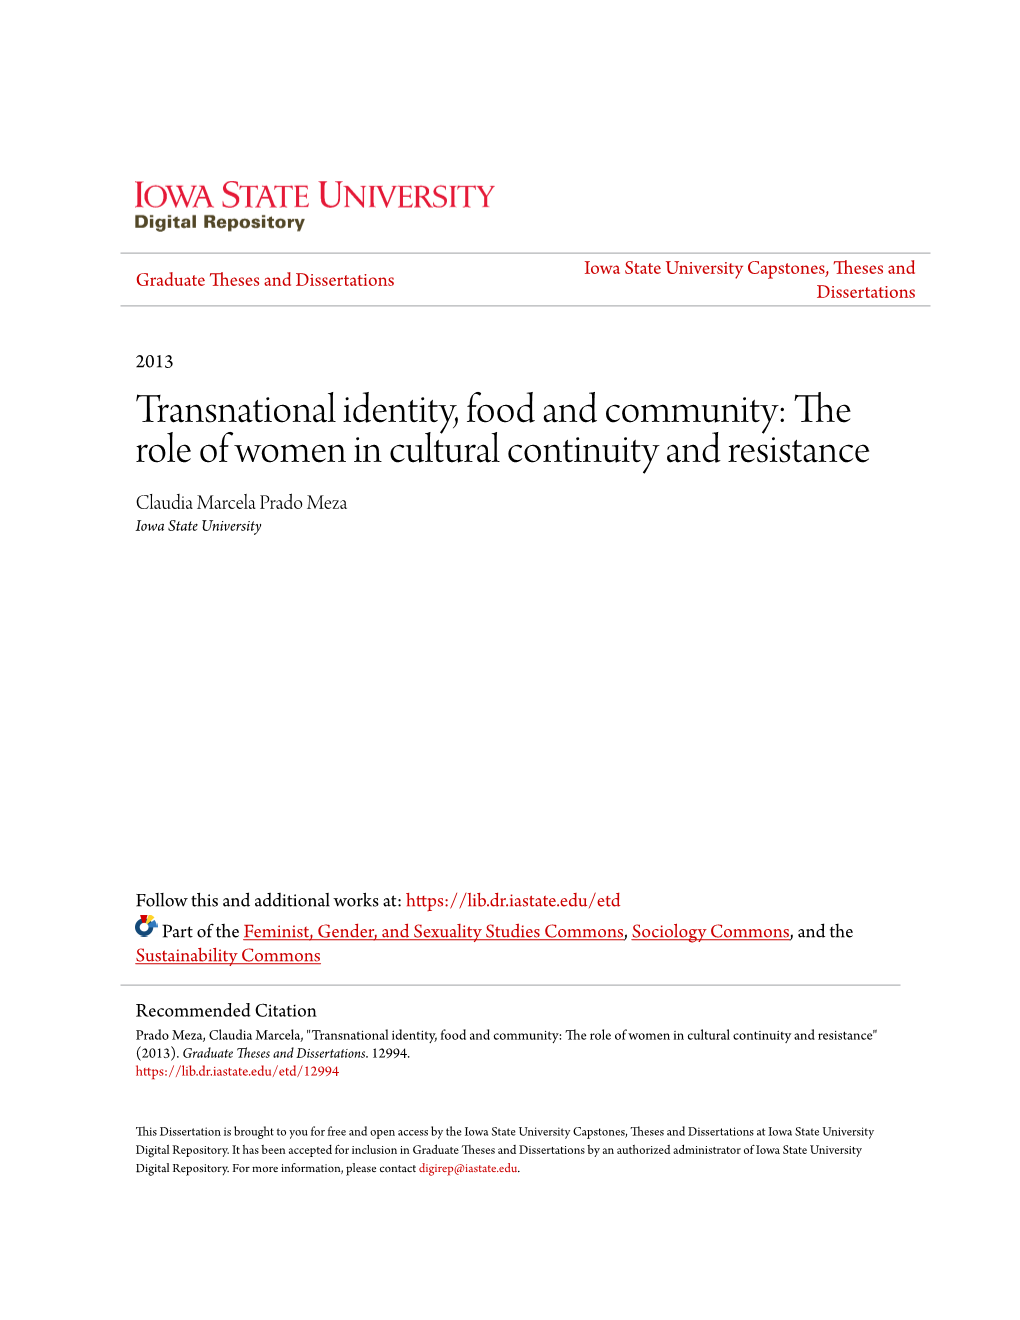 Transnational Identity, Food and Community: the Role of Women in Cultural Continuity and Resistance Claudia Marcela Prado Meza Iowa State University